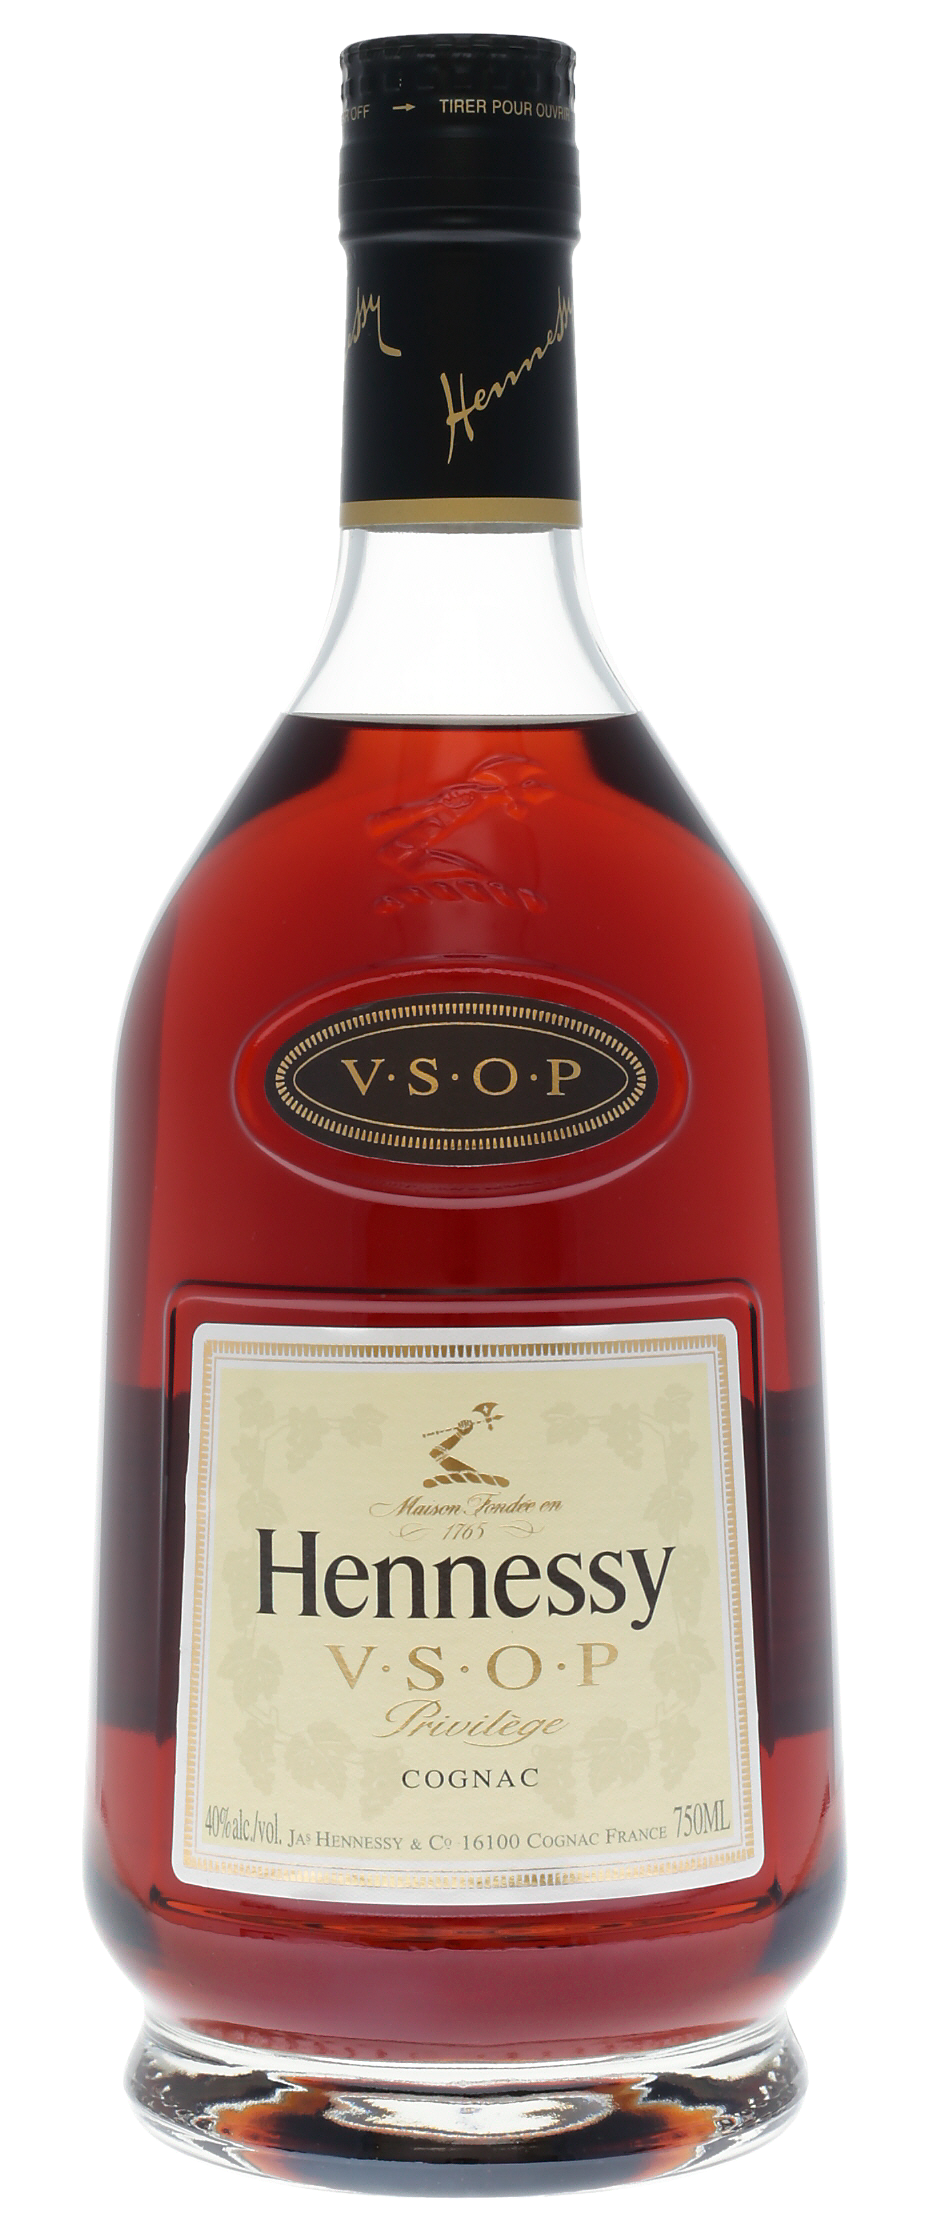 10 Things You Should Know About Hennessy Cognac